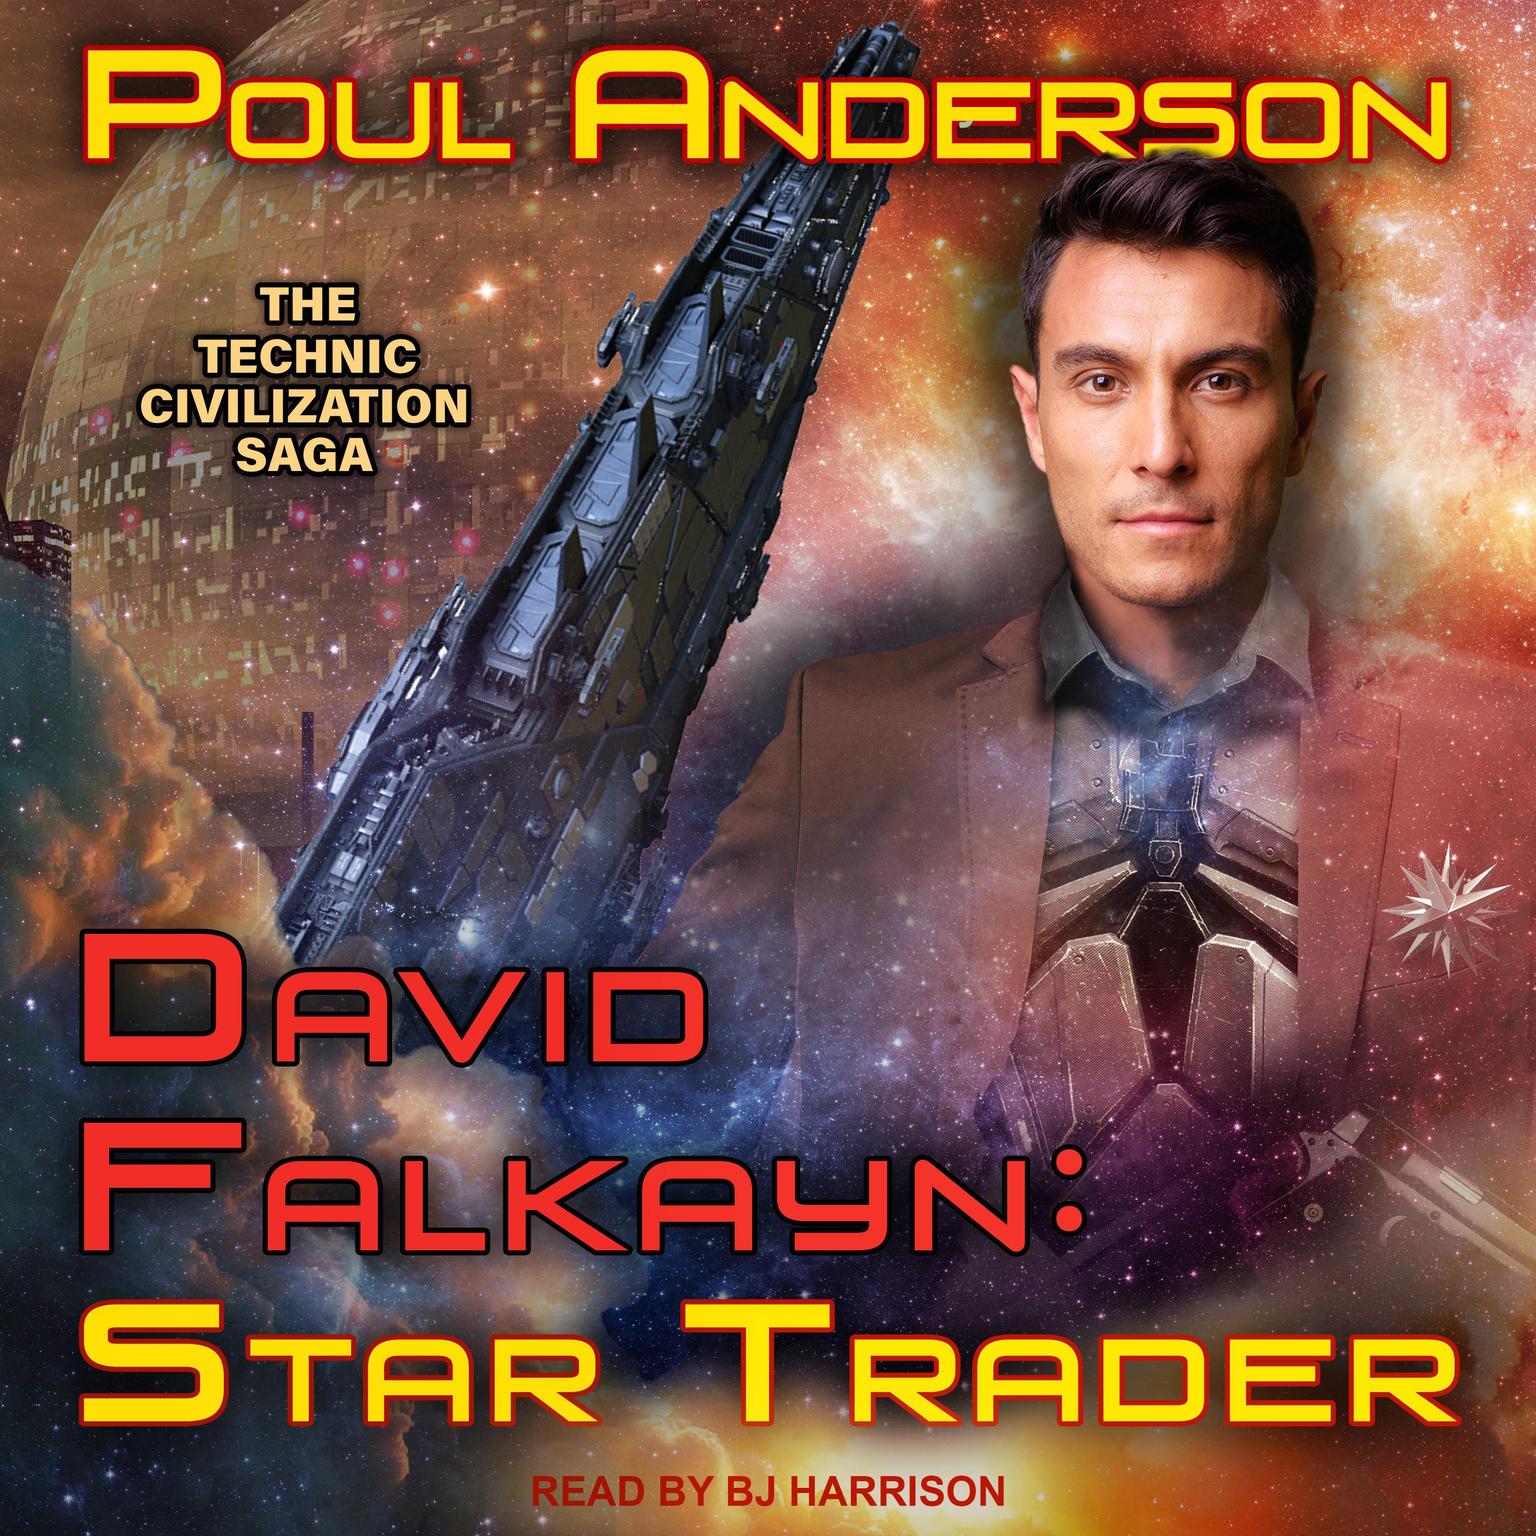 David Falkayn: Star Trader Audiobook, by Poul Anderson